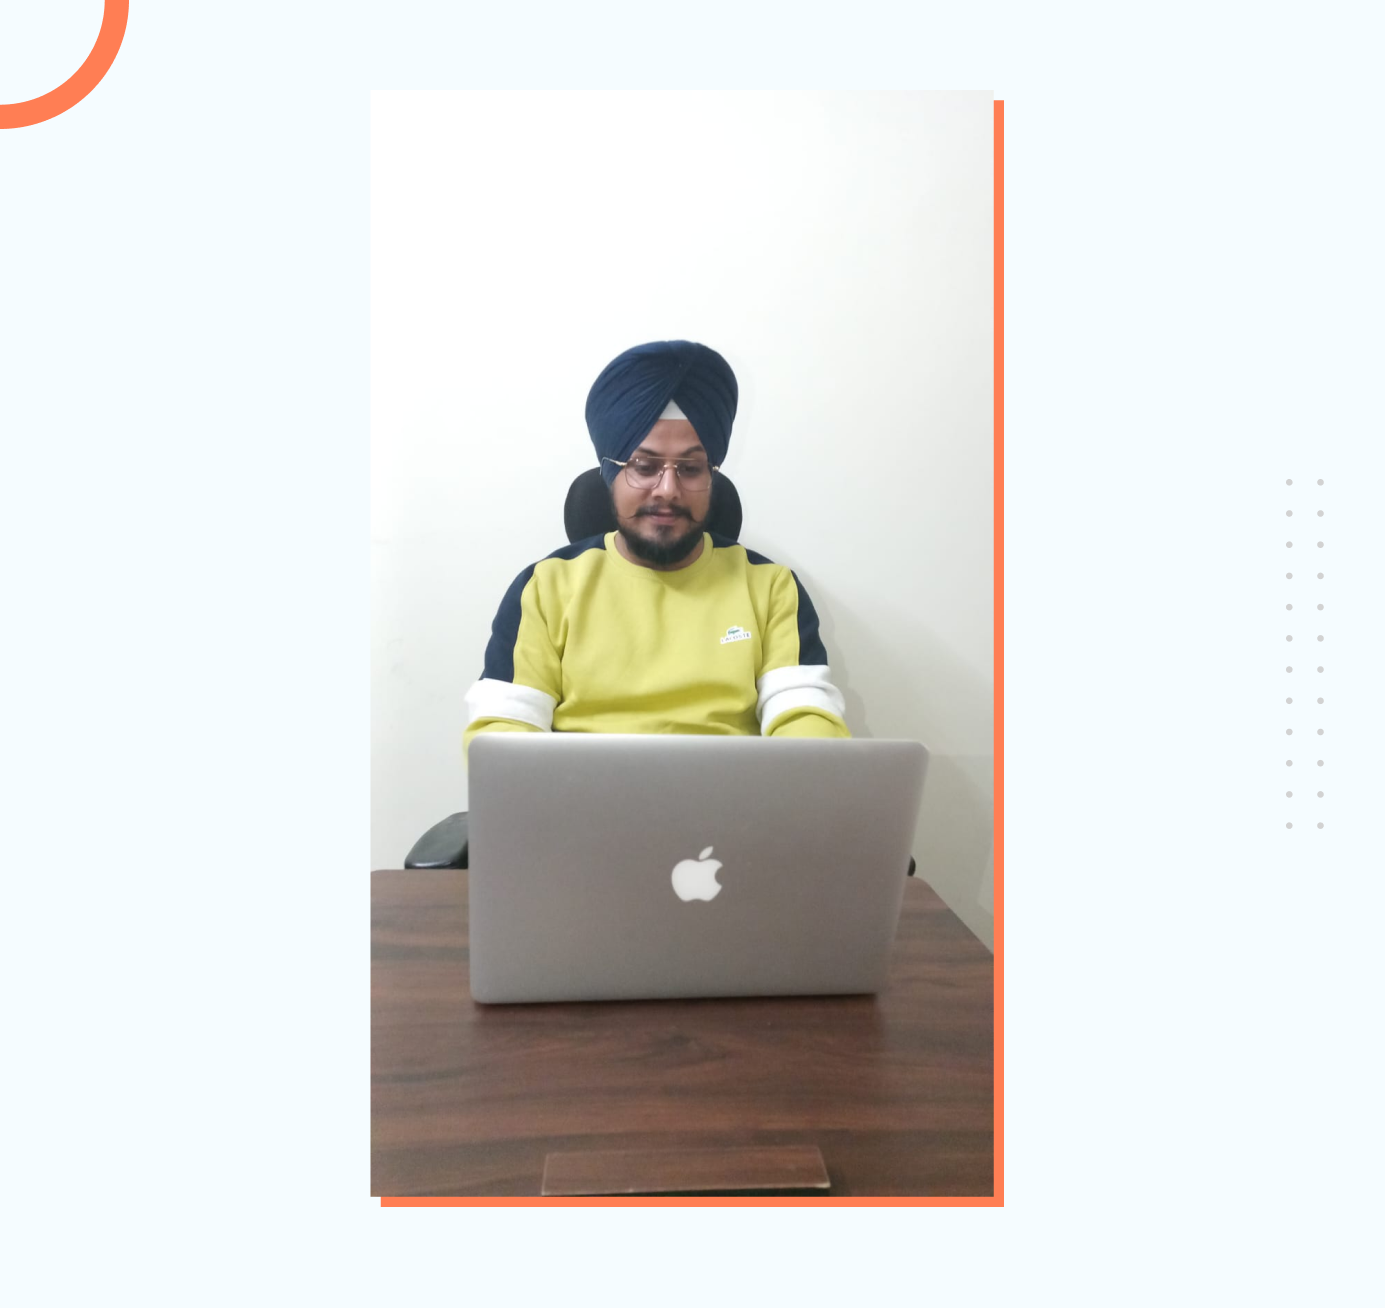 Jaspreet working from his home office